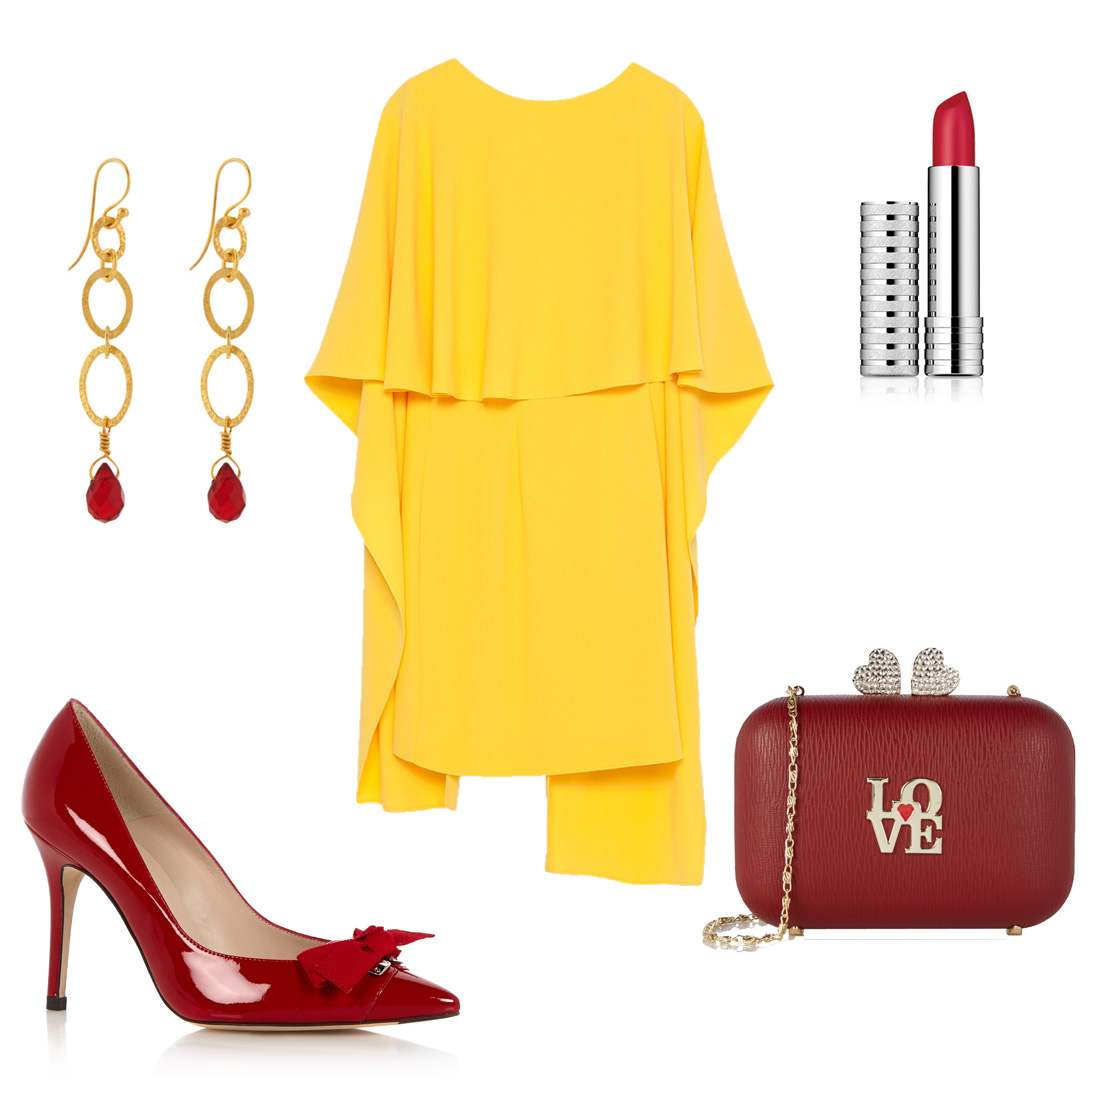 Bag at You - Fashion Blog - Wedding look 1 - Bruiloft outfit voor gast - Yellow love